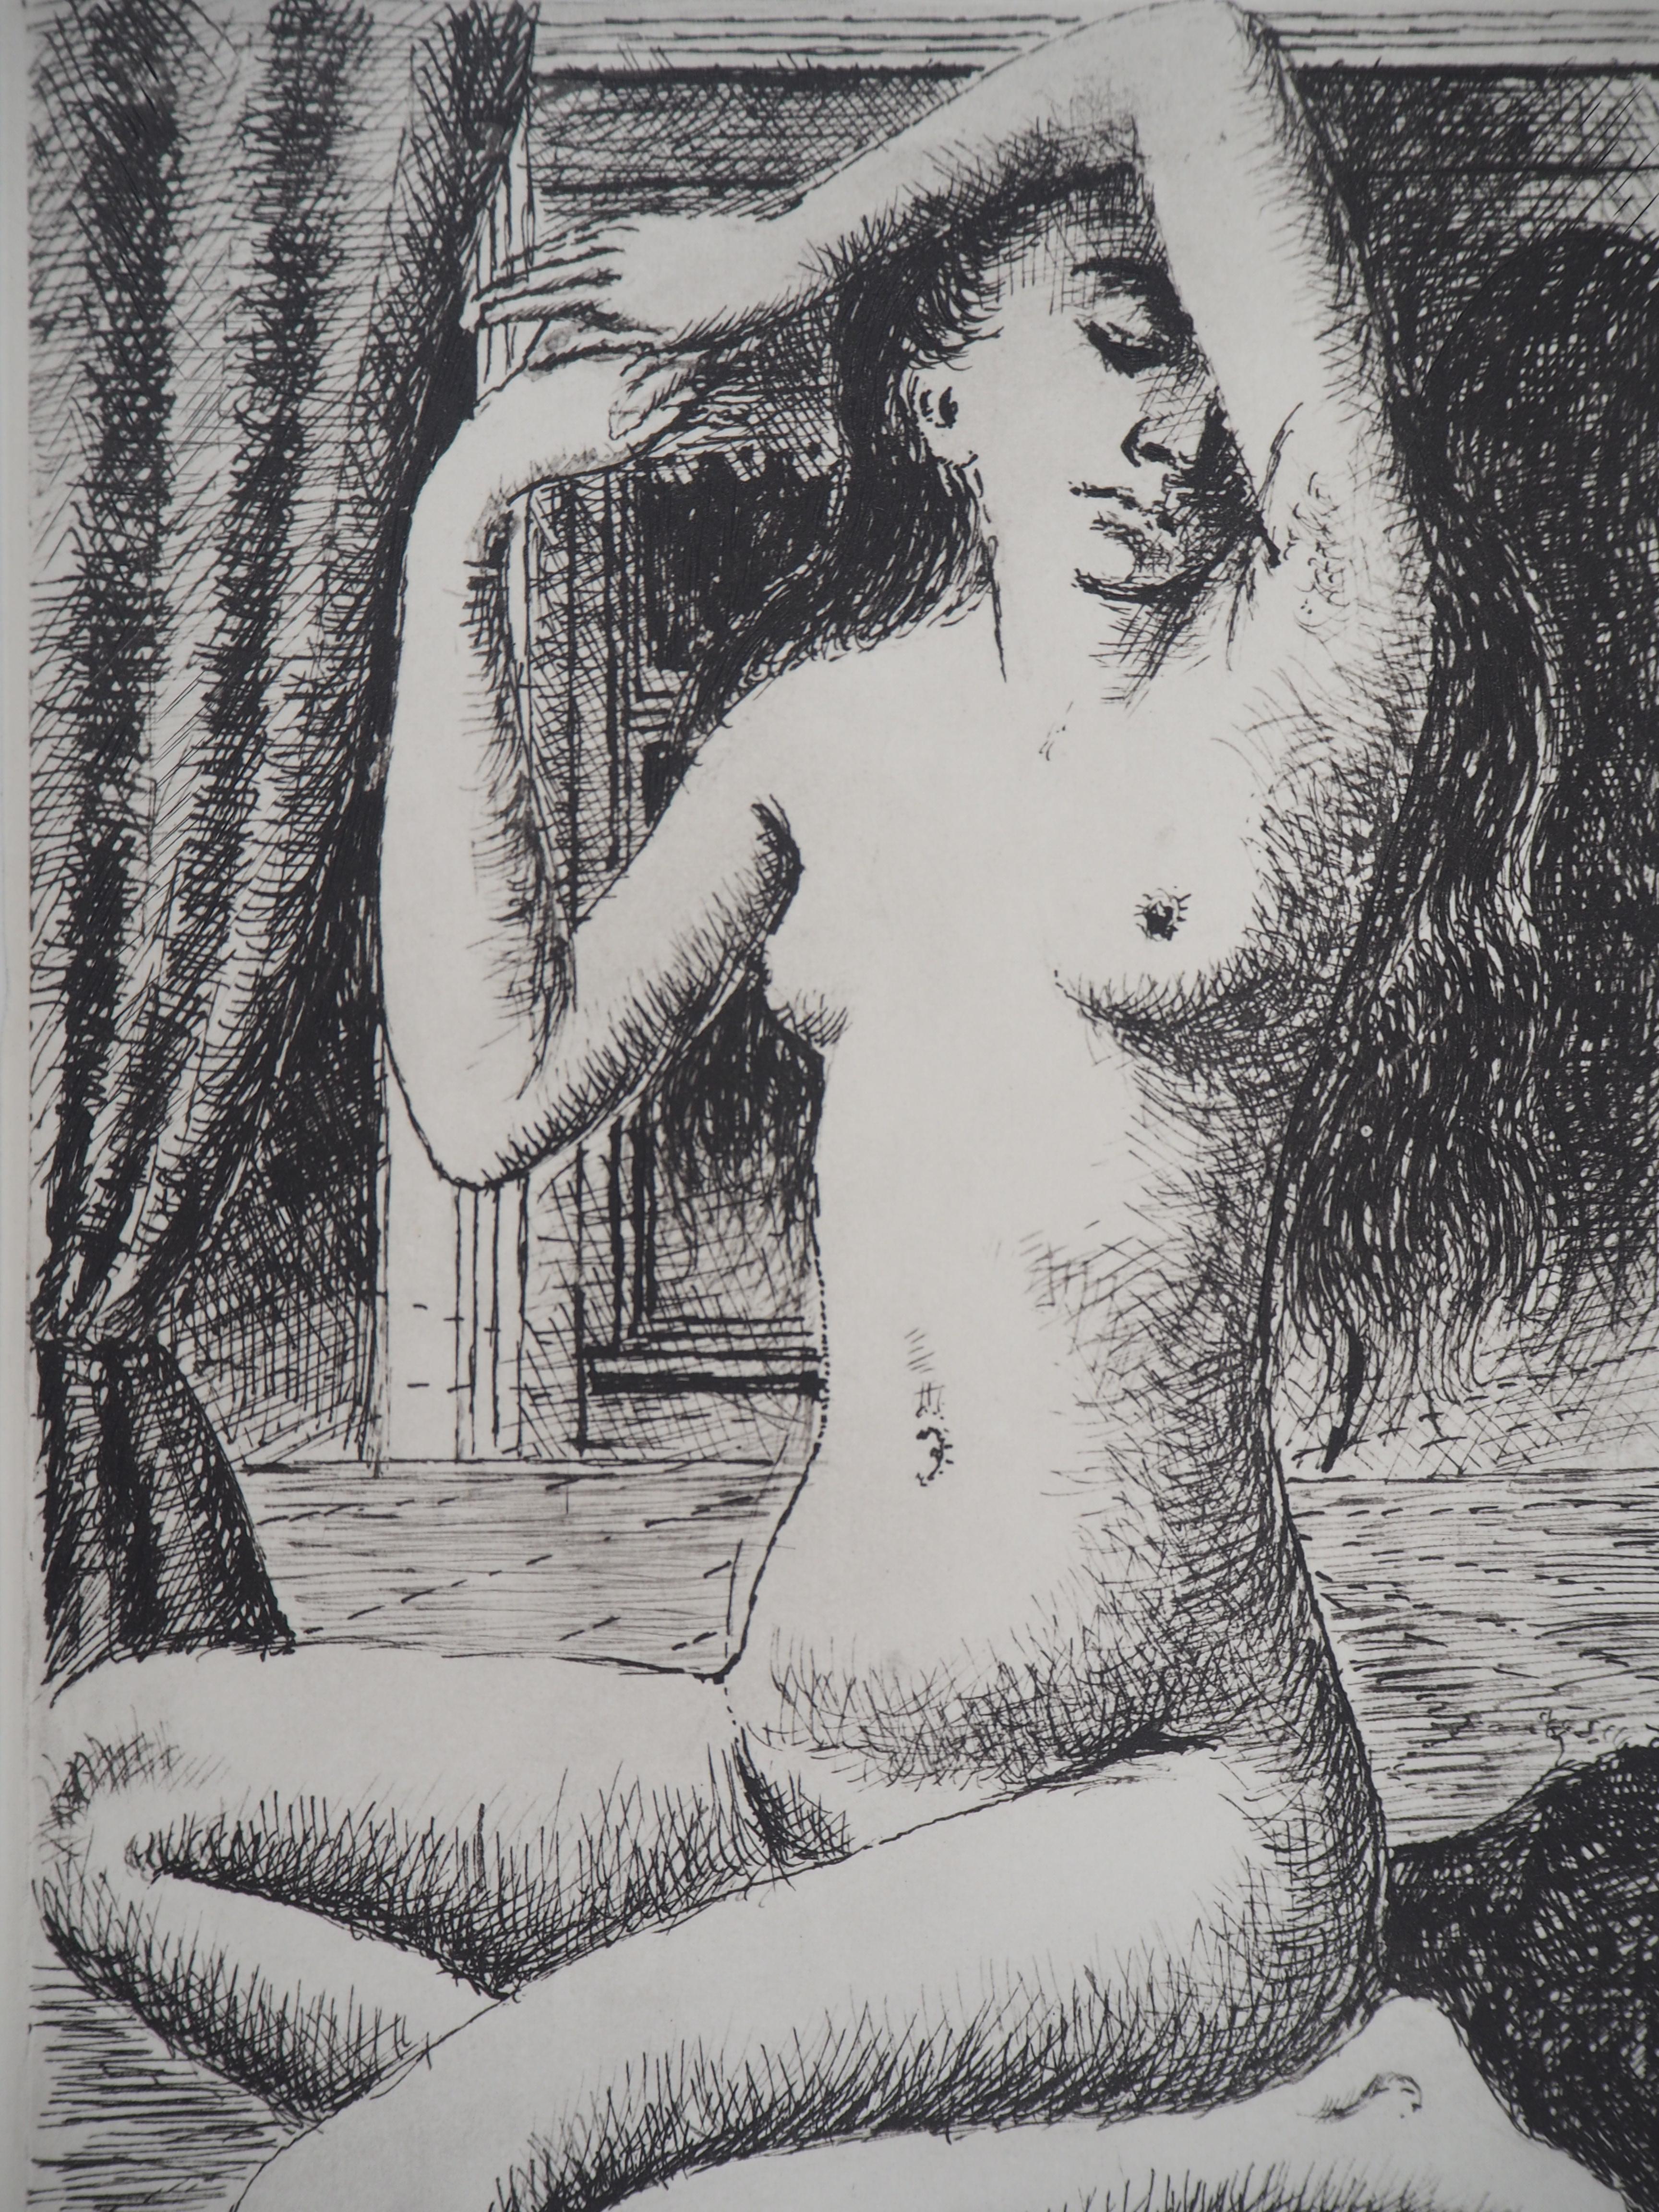 Delight - Etching - 1970 - Modern Print by Paul Delvaux